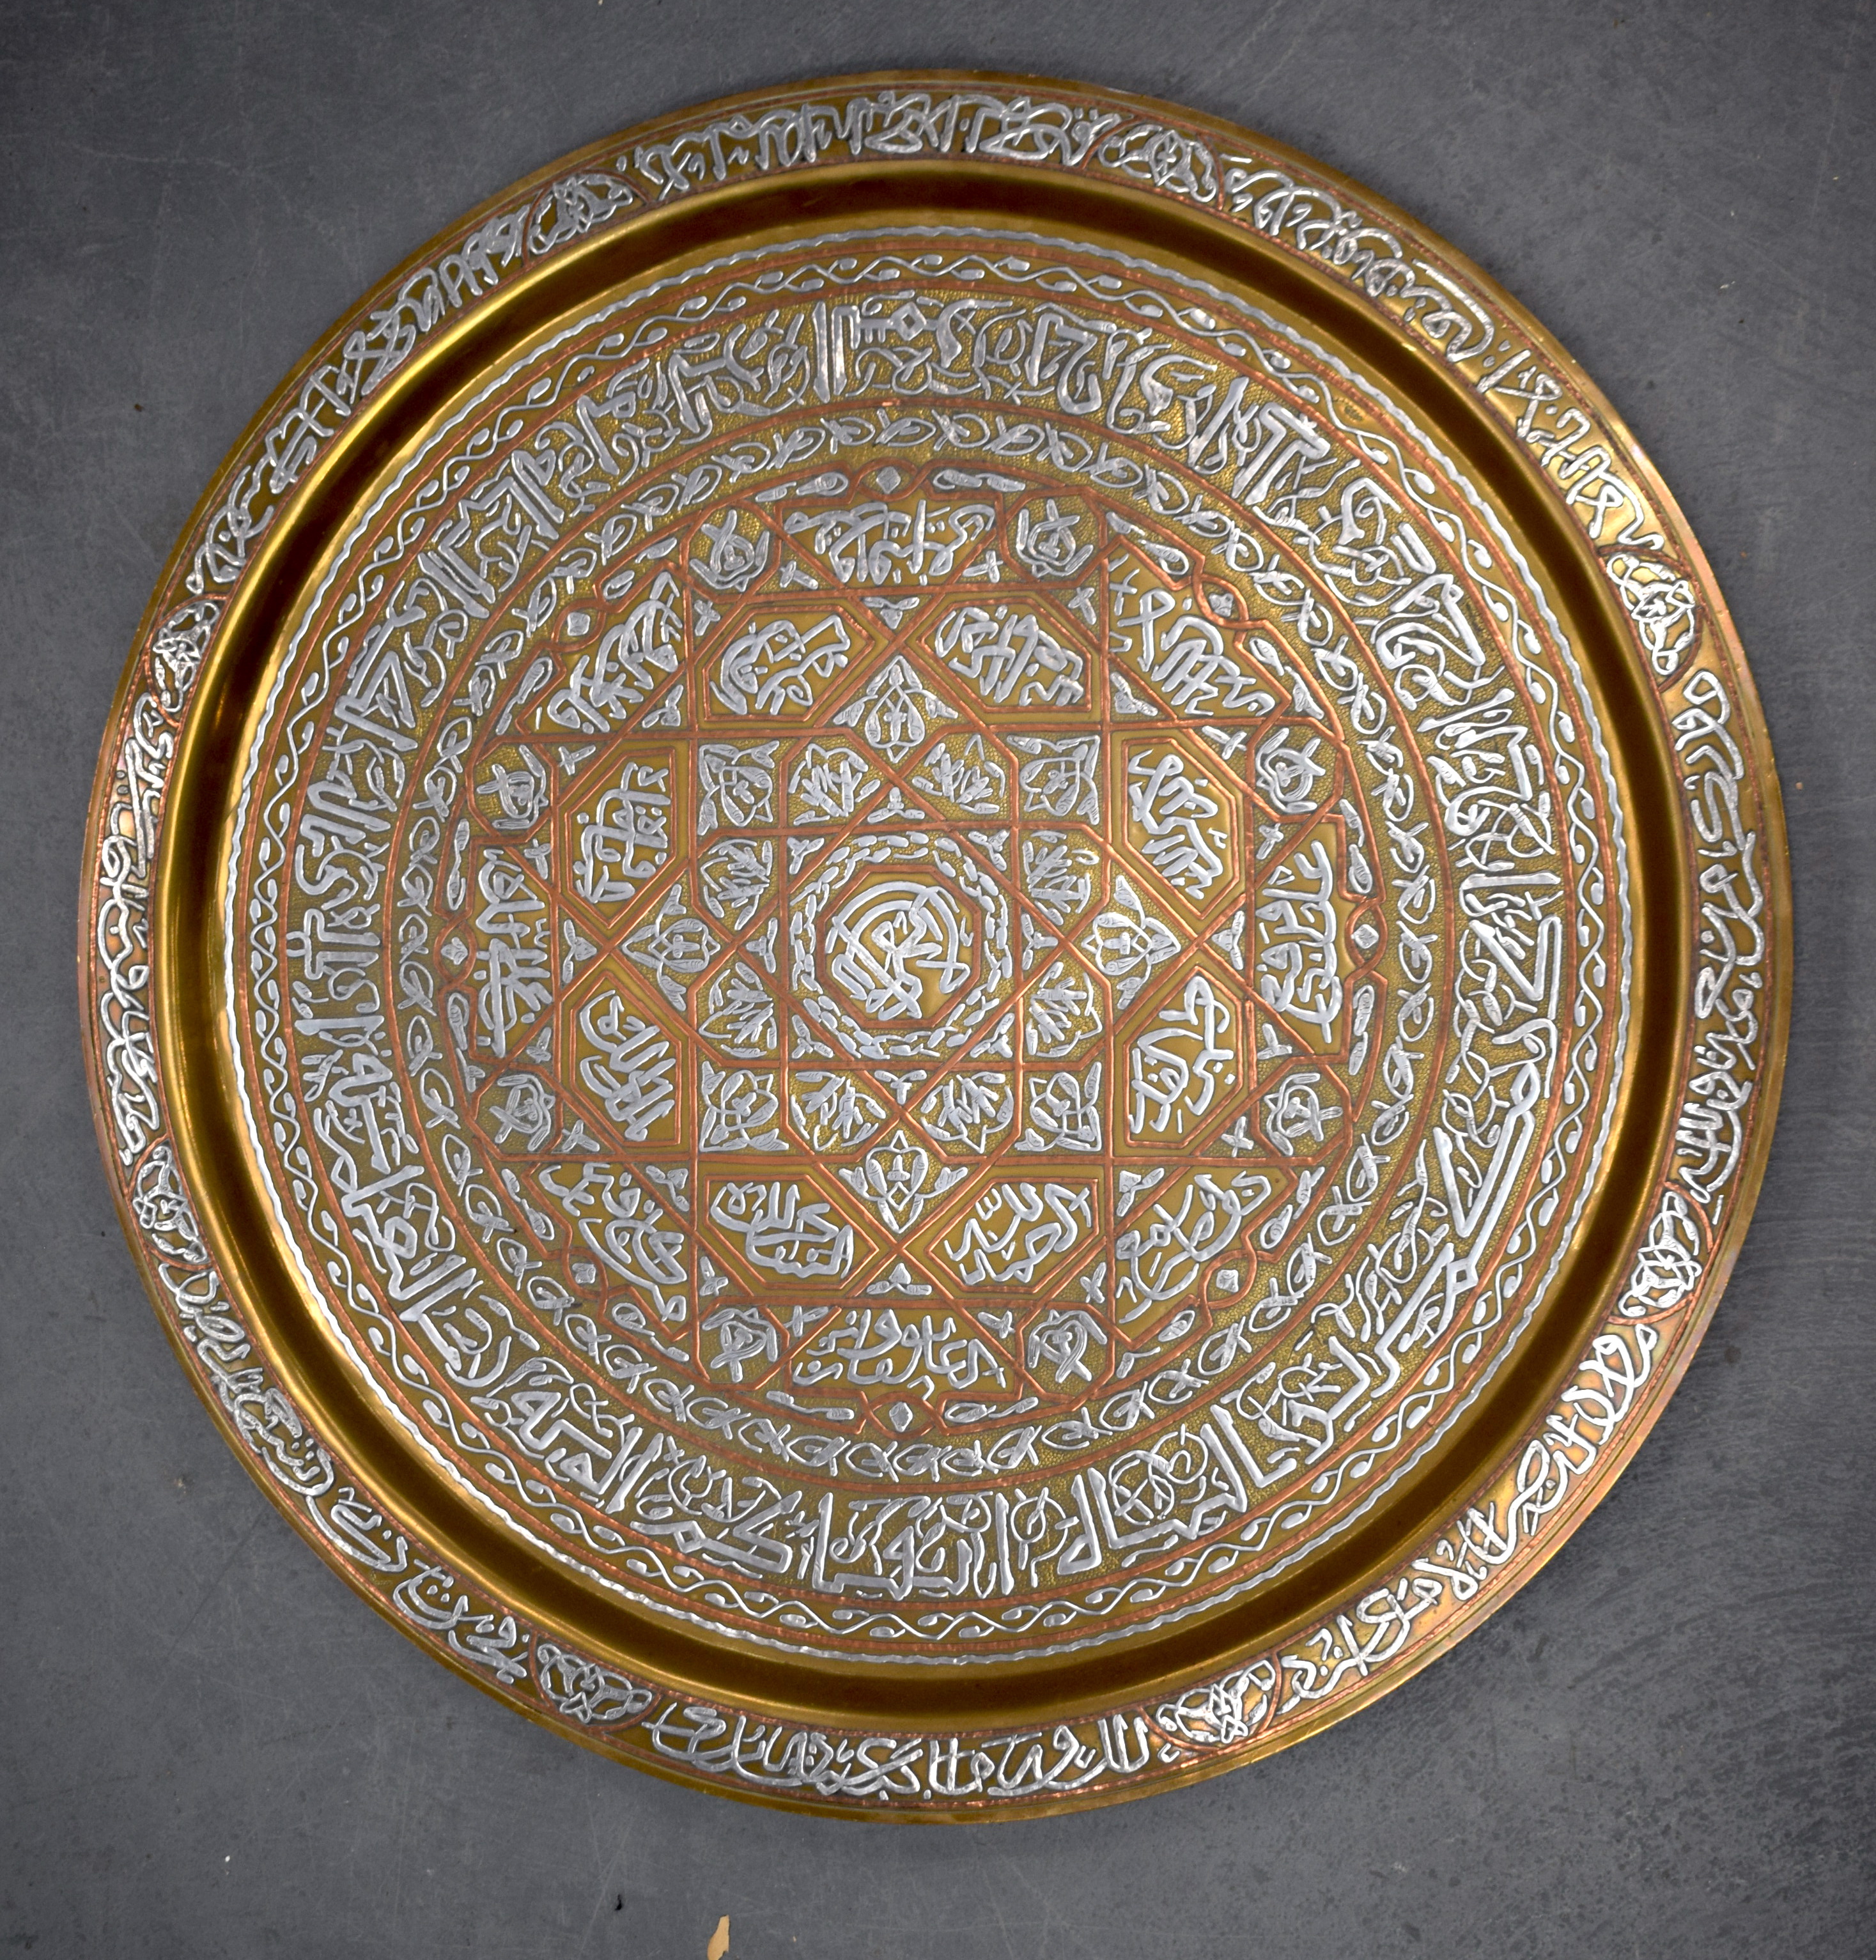 A LARGE MIDDLE EASTERN SILVER INLAID CAIROWARE STYLE CHARGER. 69 cm diameter.